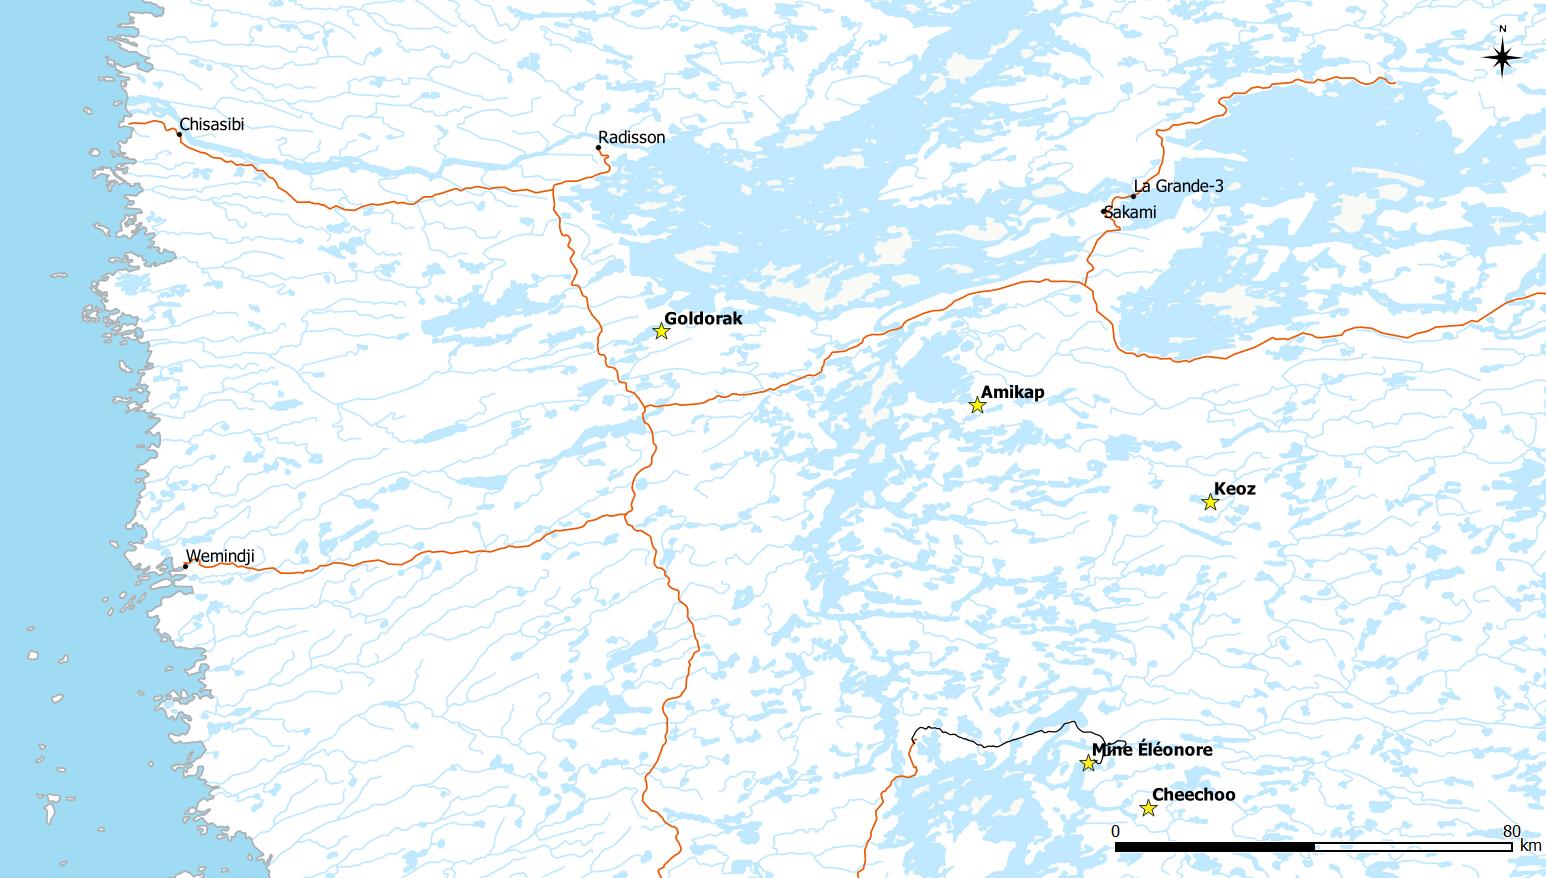 Sirios acquires three new gold projects in James Bay